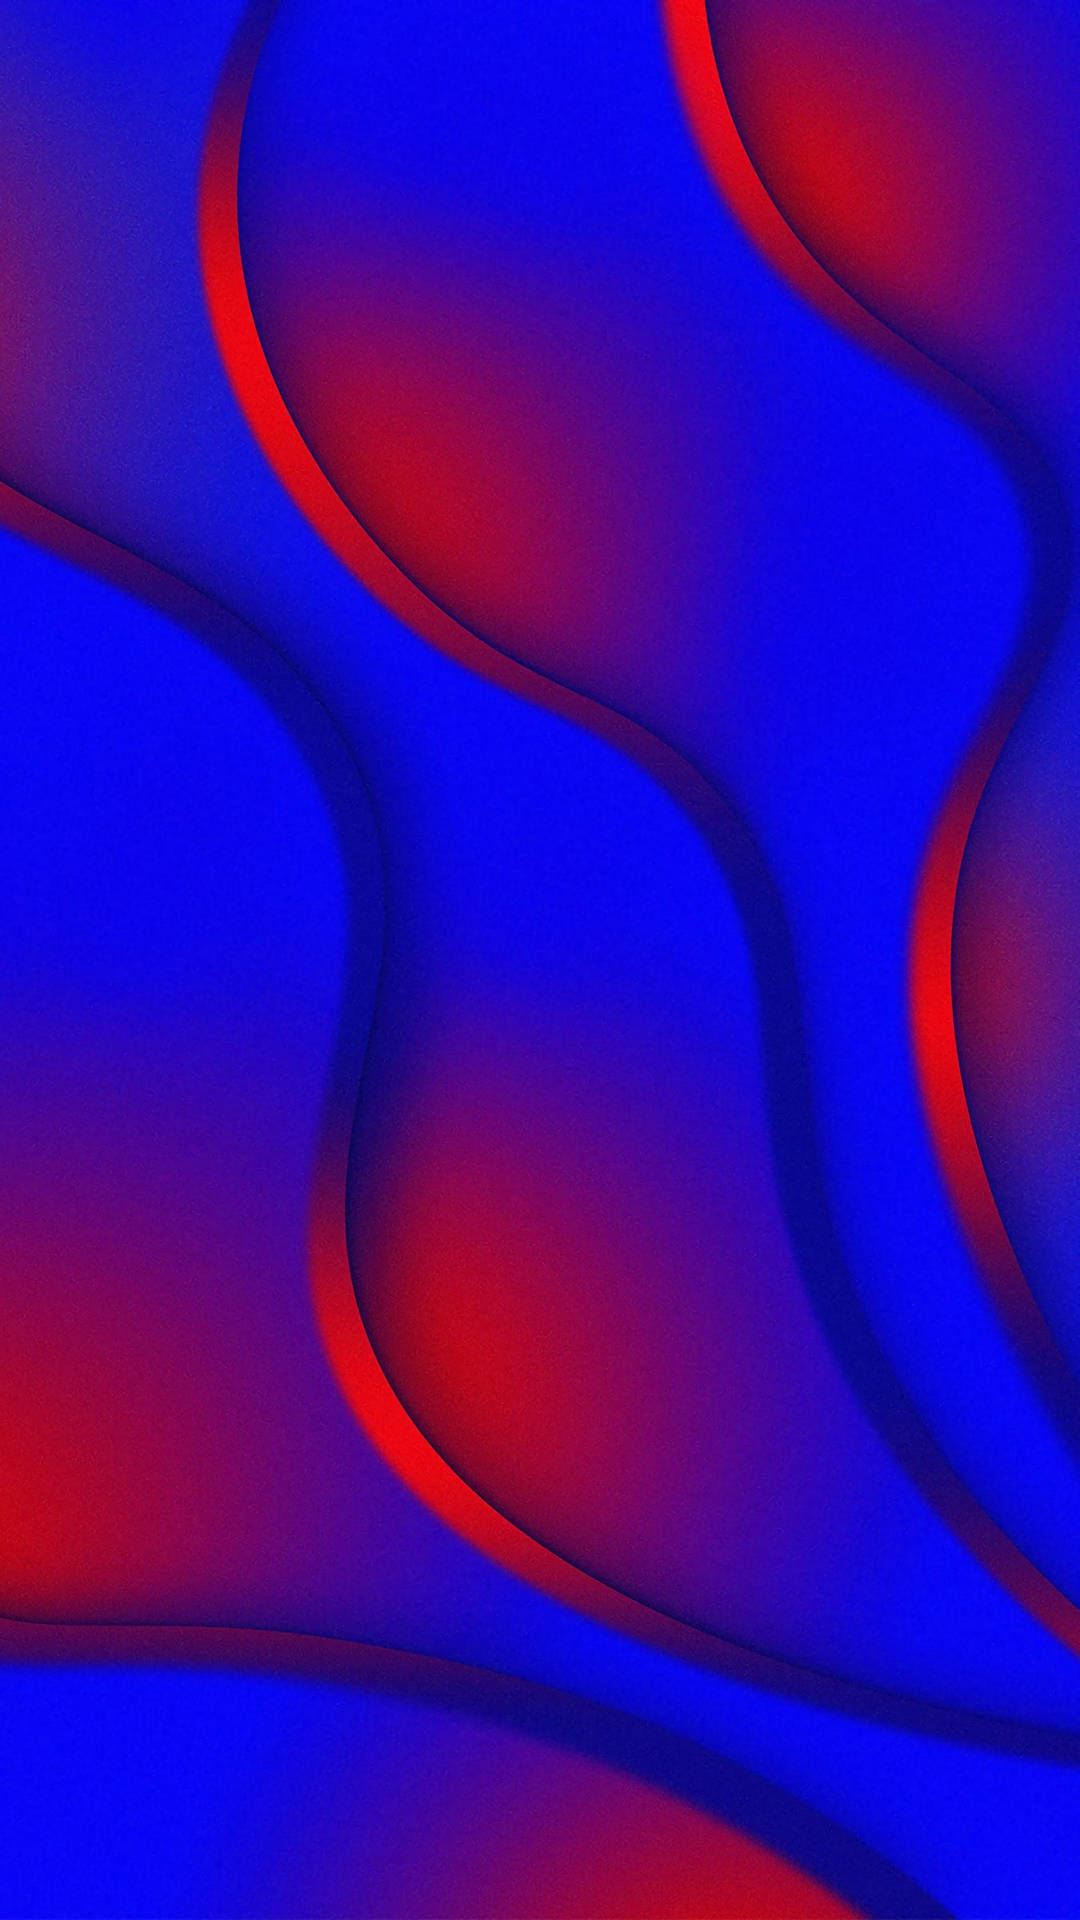 Red And Blue Wave Art Wallpaper